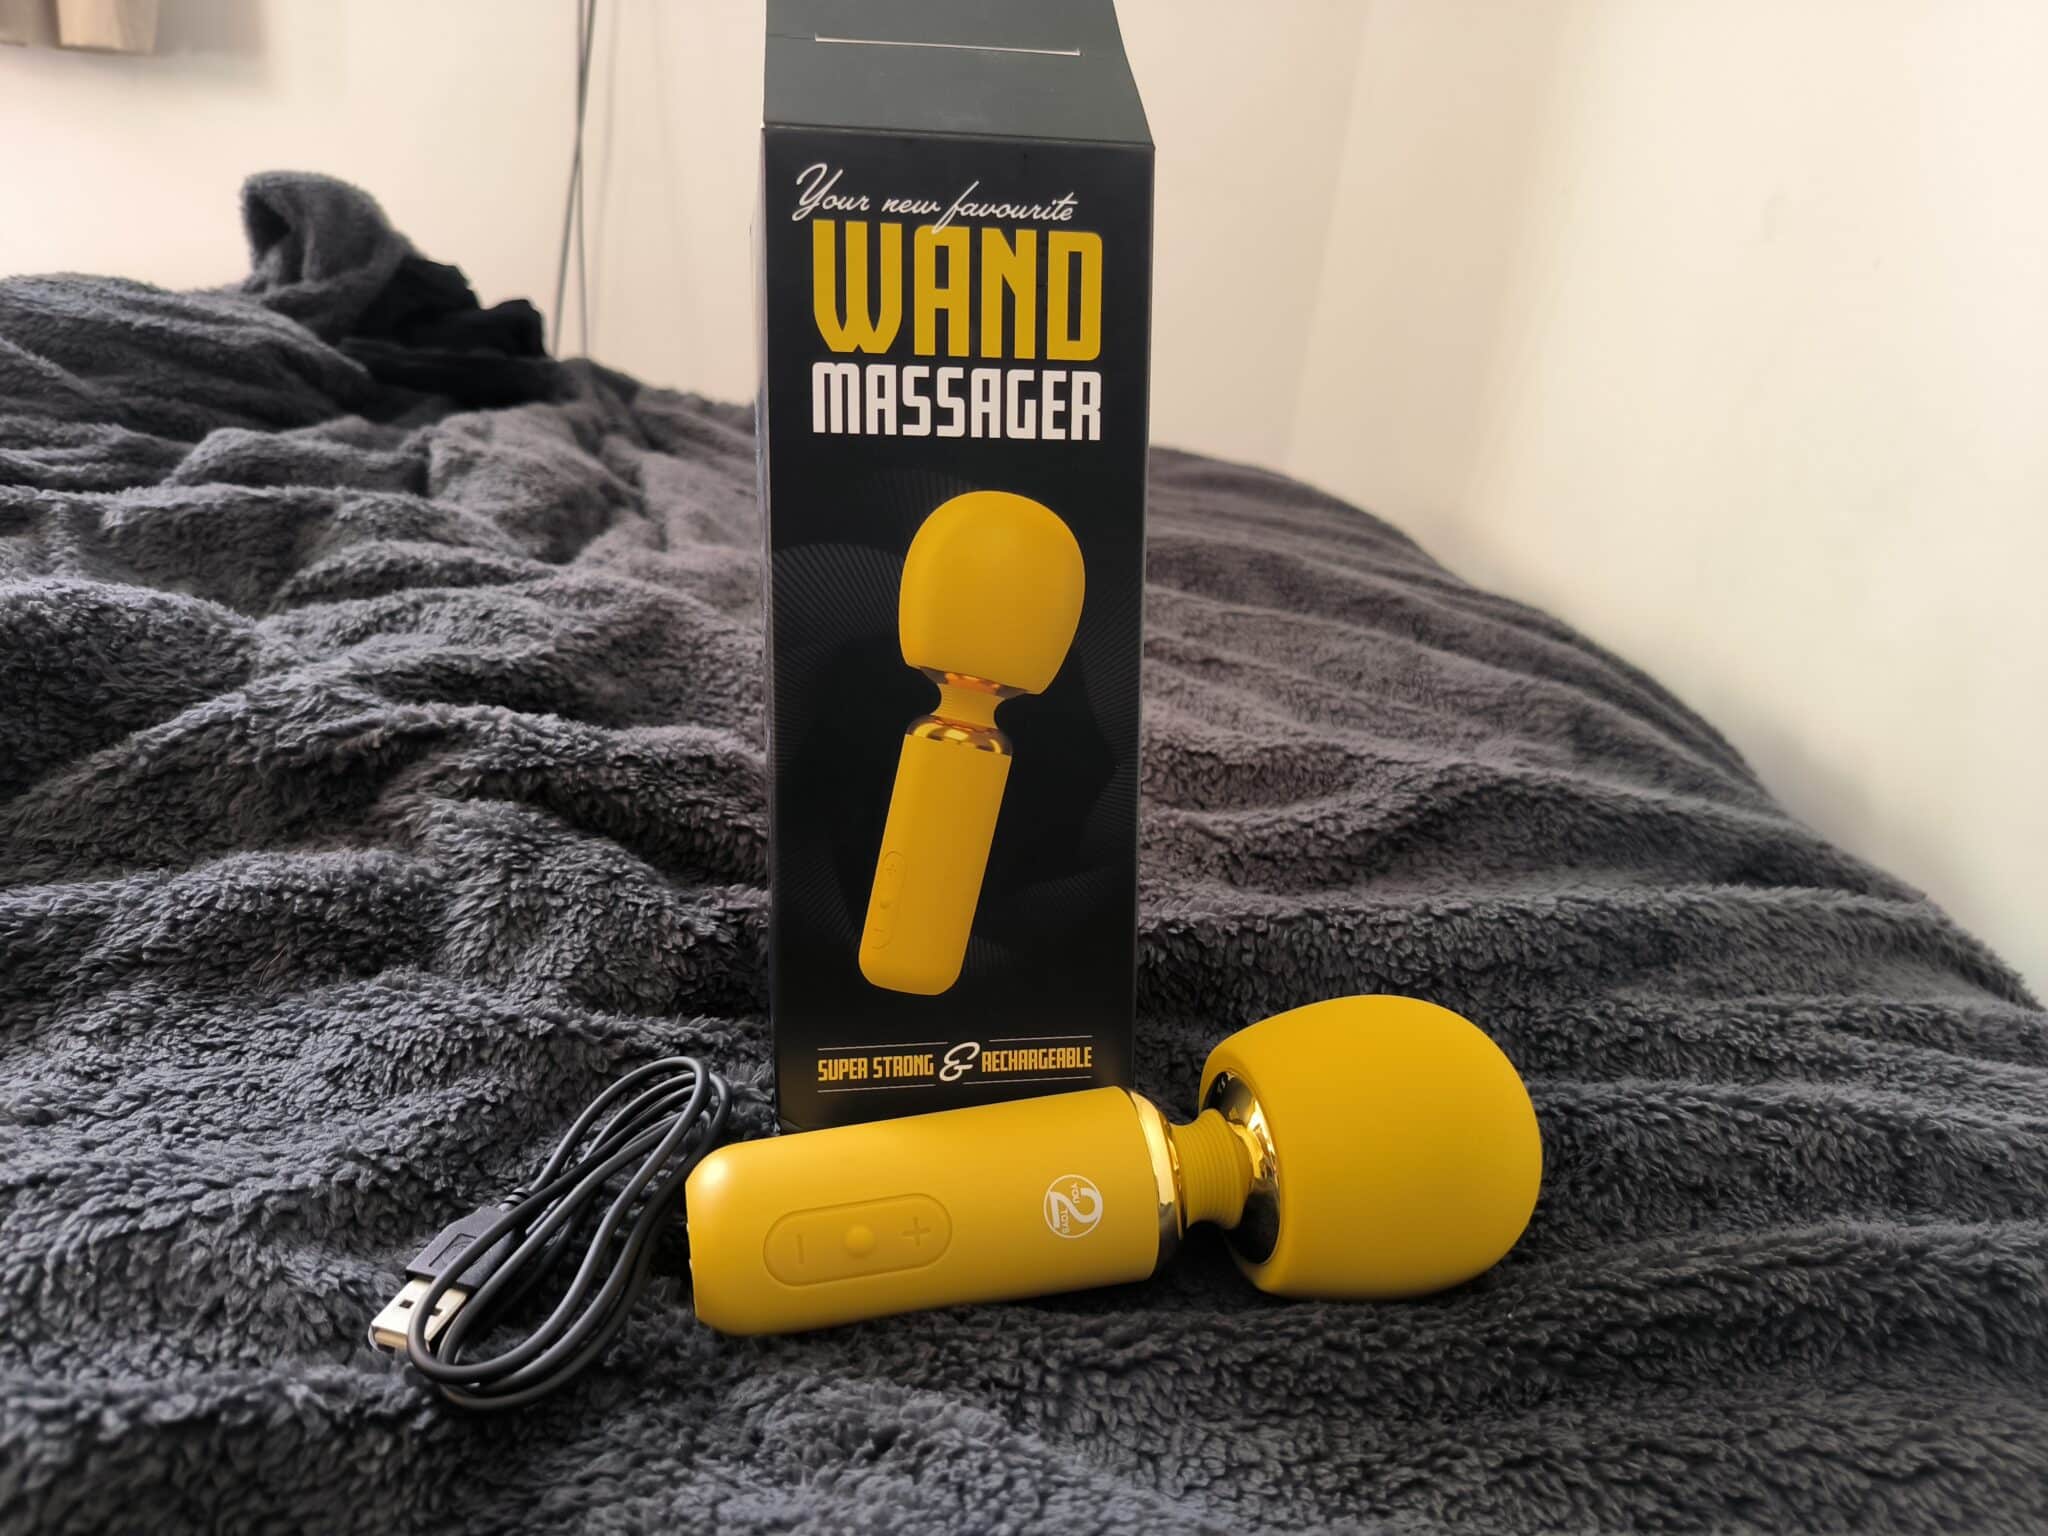 Orion Your New Favorite Wand Massager. Slide 5